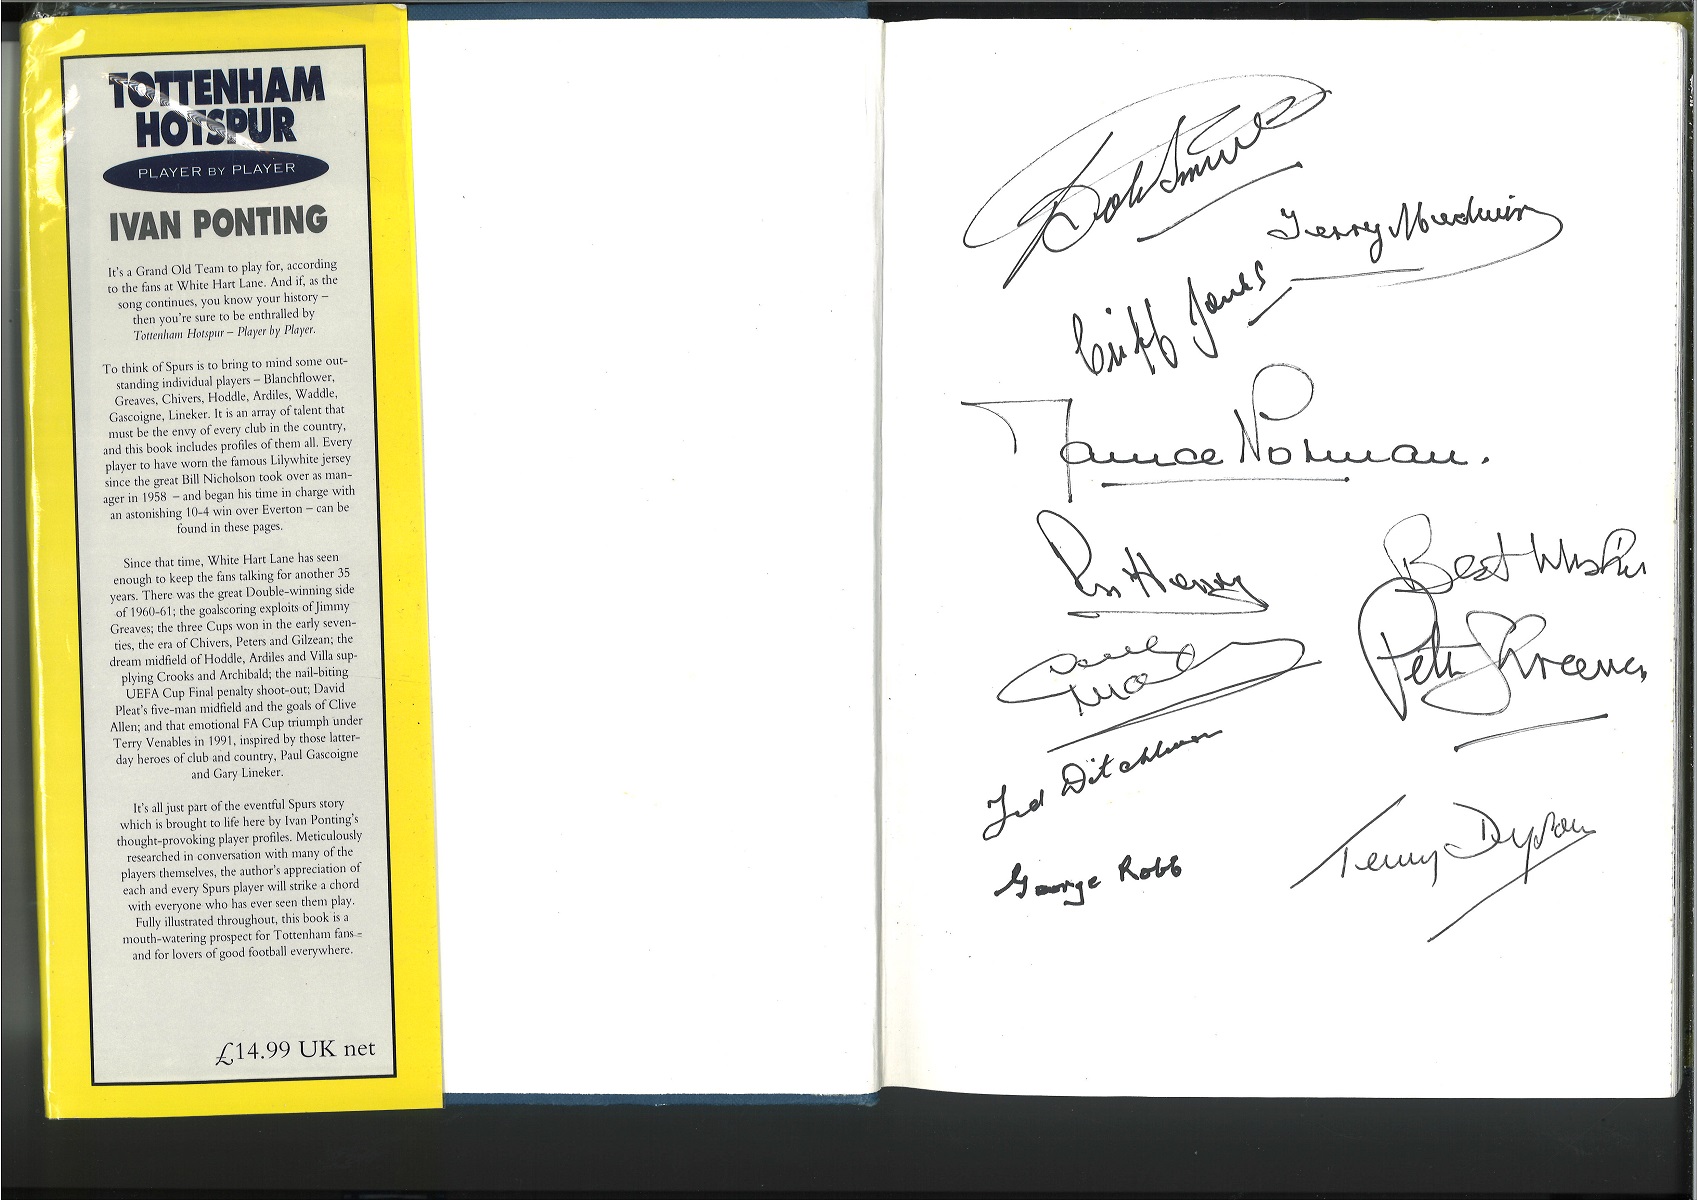 Football Tottenham Hotspur player by player multi signed hard back book includes over 30 Spurs - Image 2 of 2